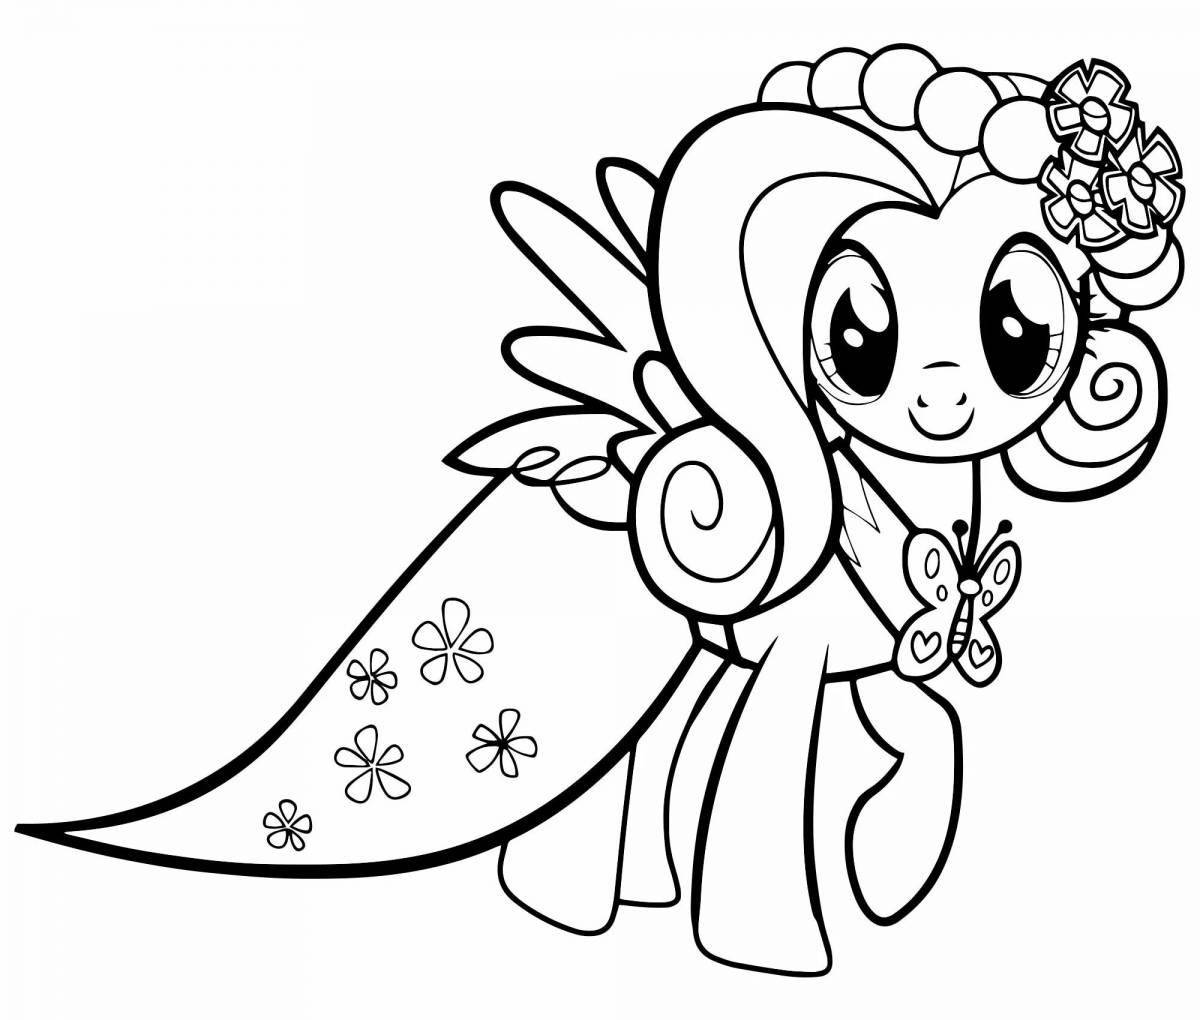 Sparkling pony coloring book for girls 4-5 years old